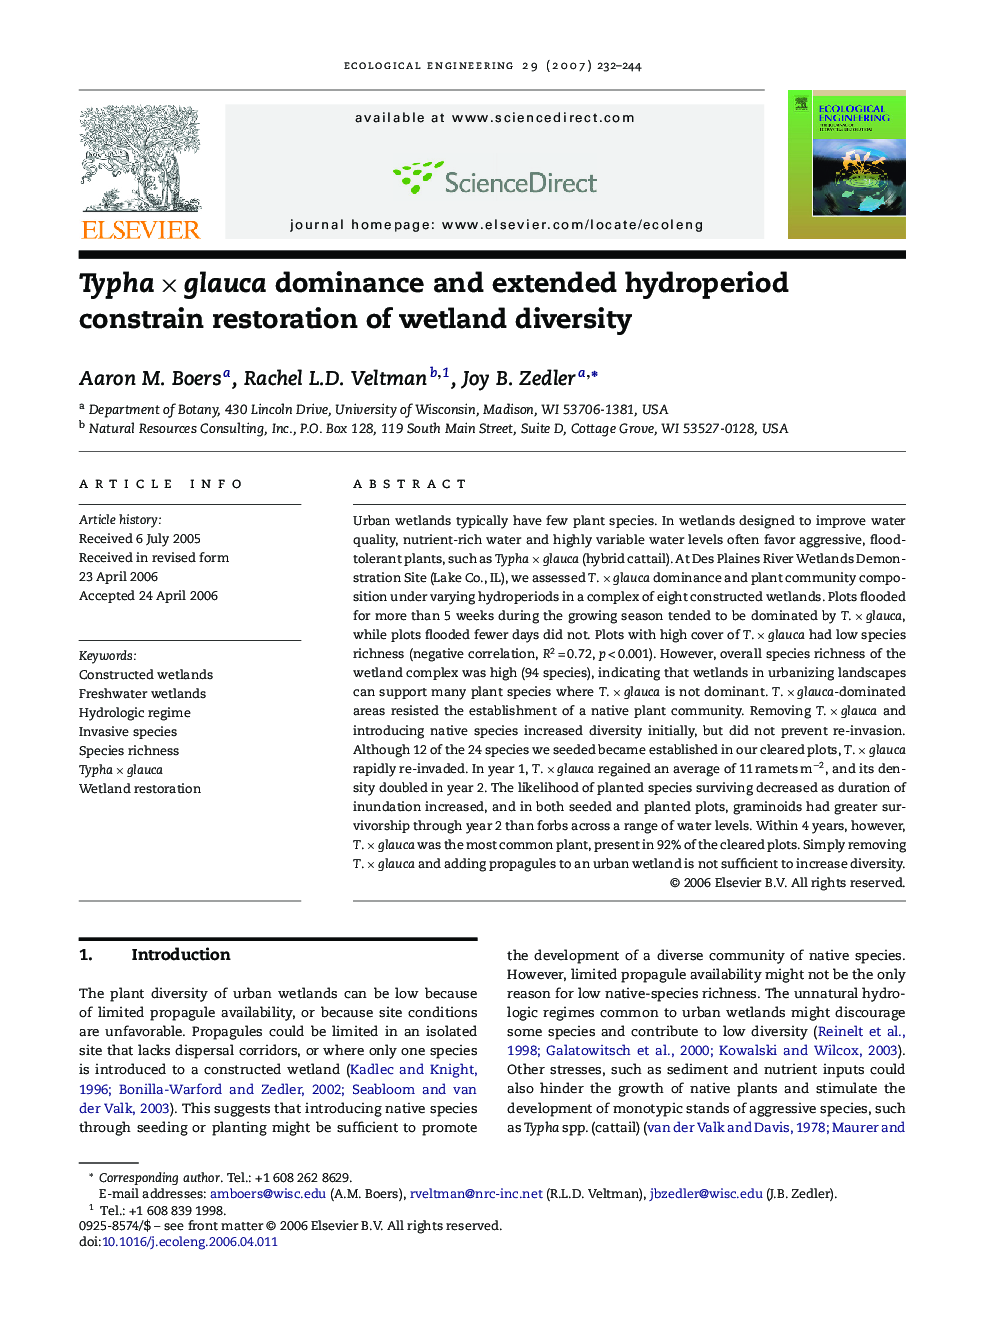 Typha × glauca dominance and extended hydroperiod constrain restoration of wetland diversity